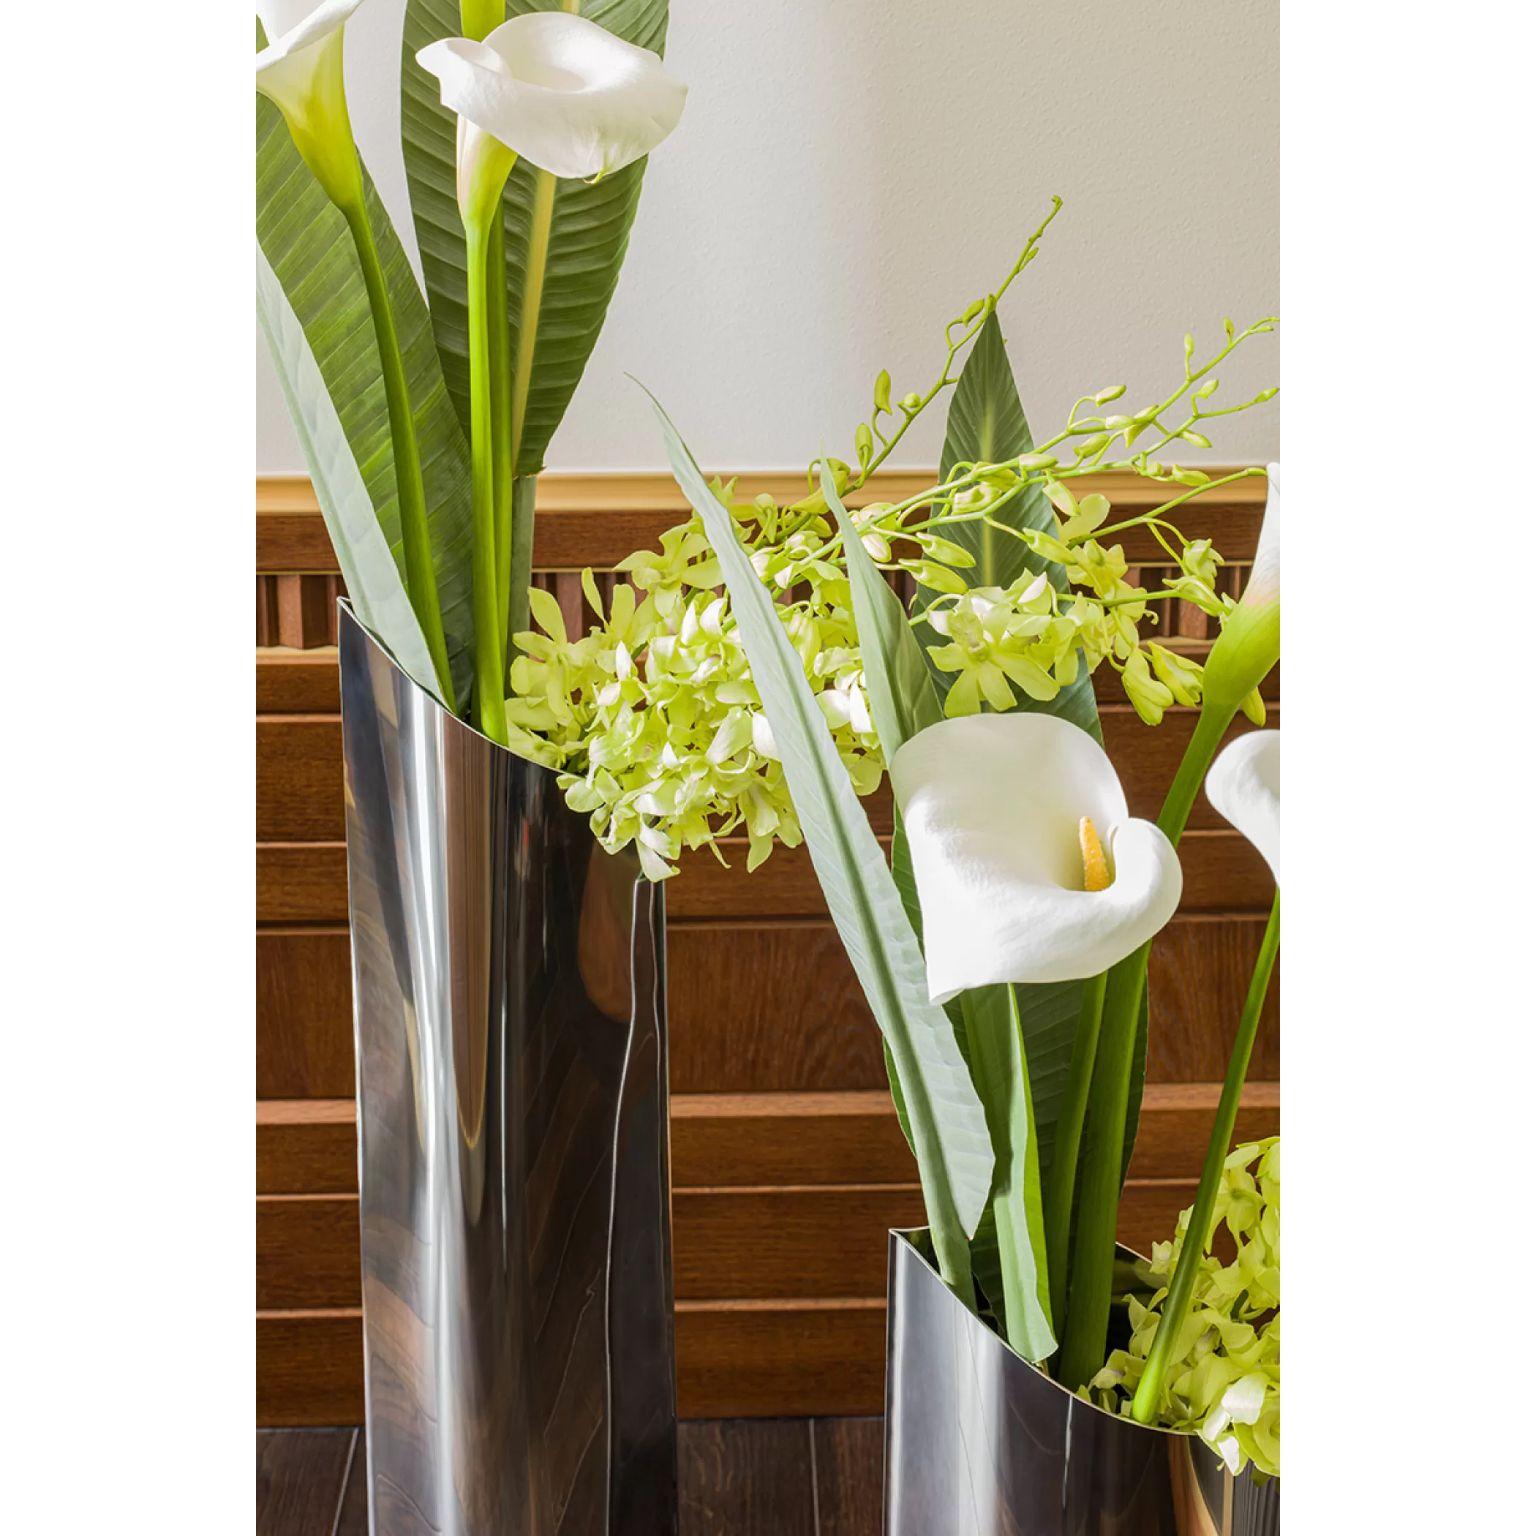 Set of 3 Parova M Vases by Zieta
Dimensions: Vase M21: D 9.5 x W 12.5 x H 21 cm.
Vase M36: D 8 x W 11.5 x H 36 cm.
Vase M51: D 10 x W 14 x H 51 cm.
Materials: Polished stainless steel.

Zietas main goal is to deliver uniqueness and customization in